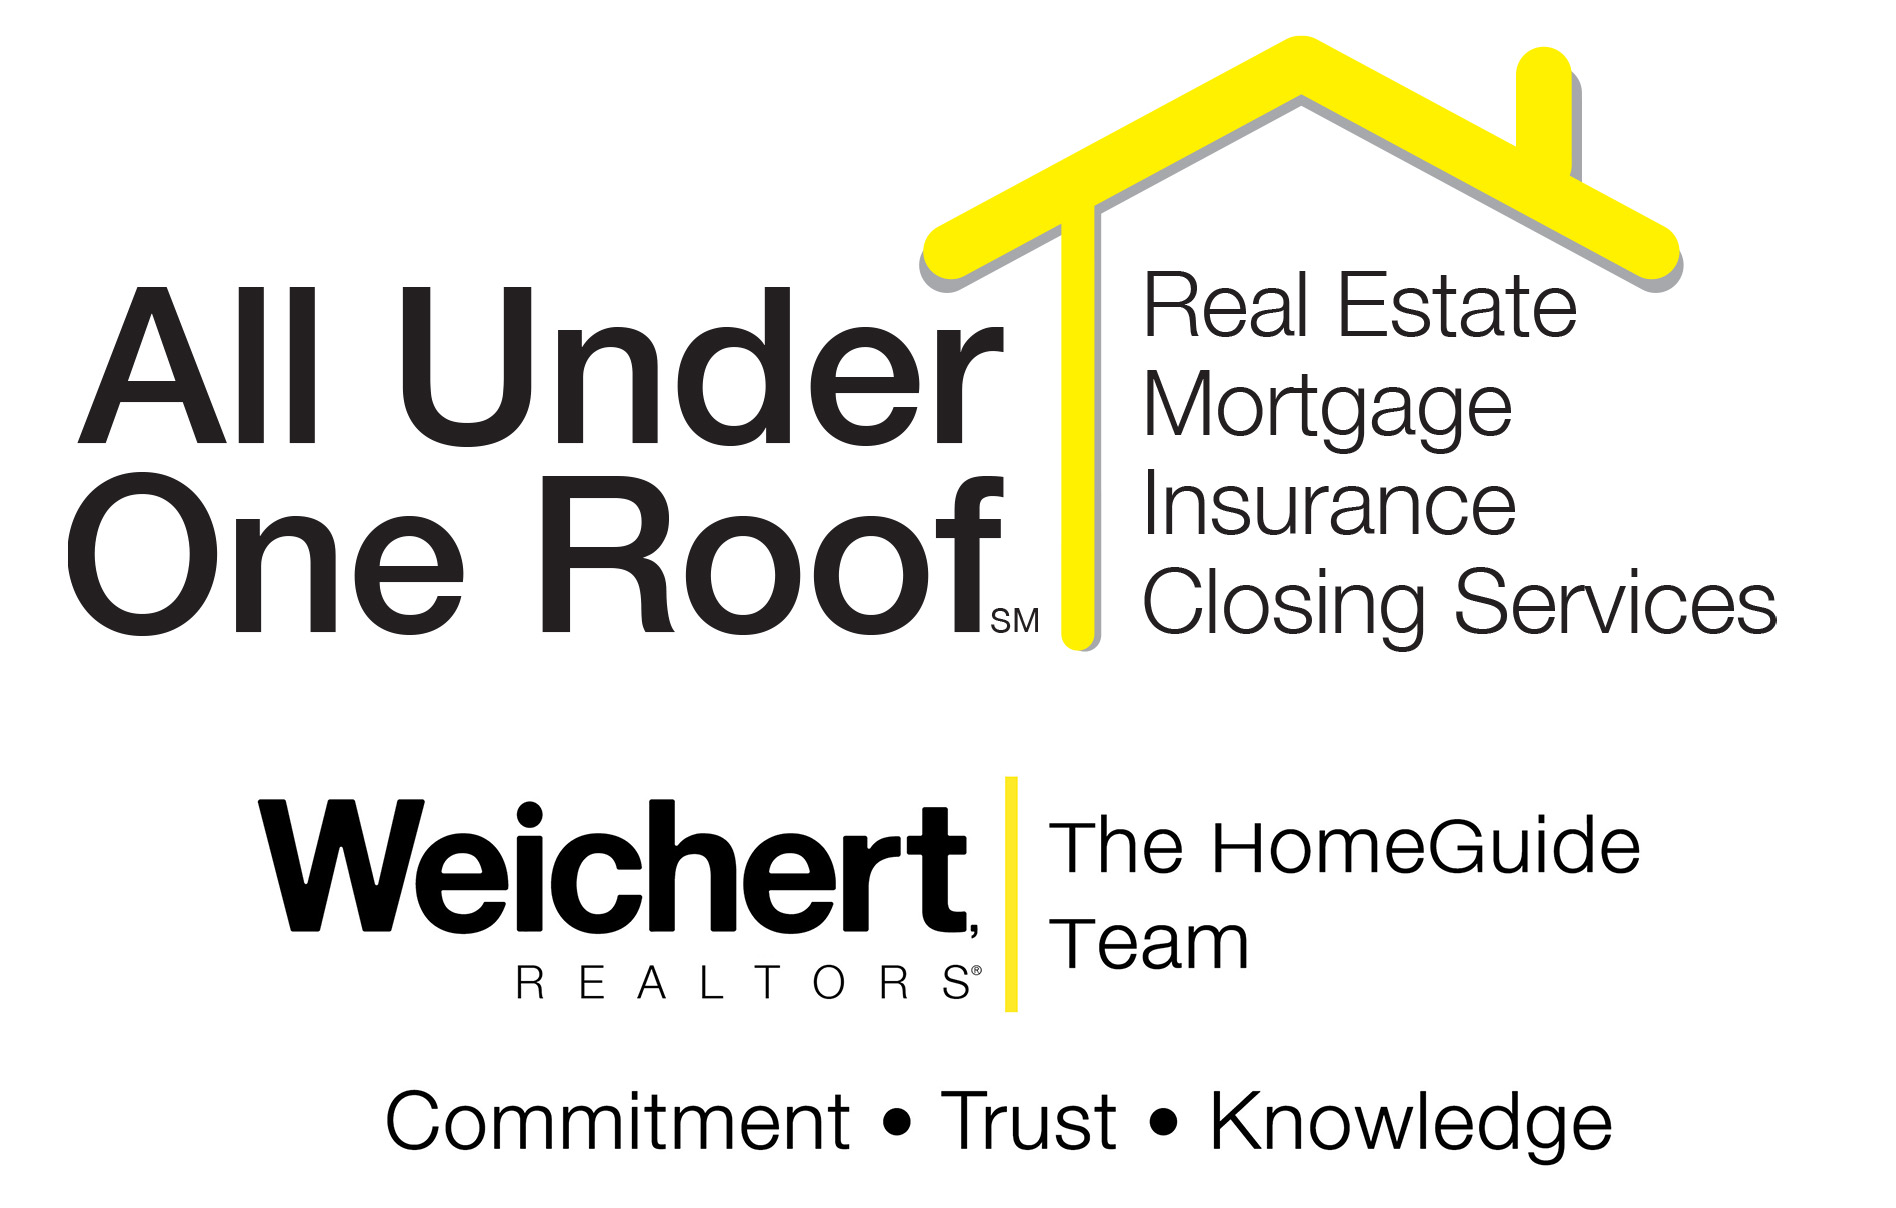 View the Weichert Team and their Services